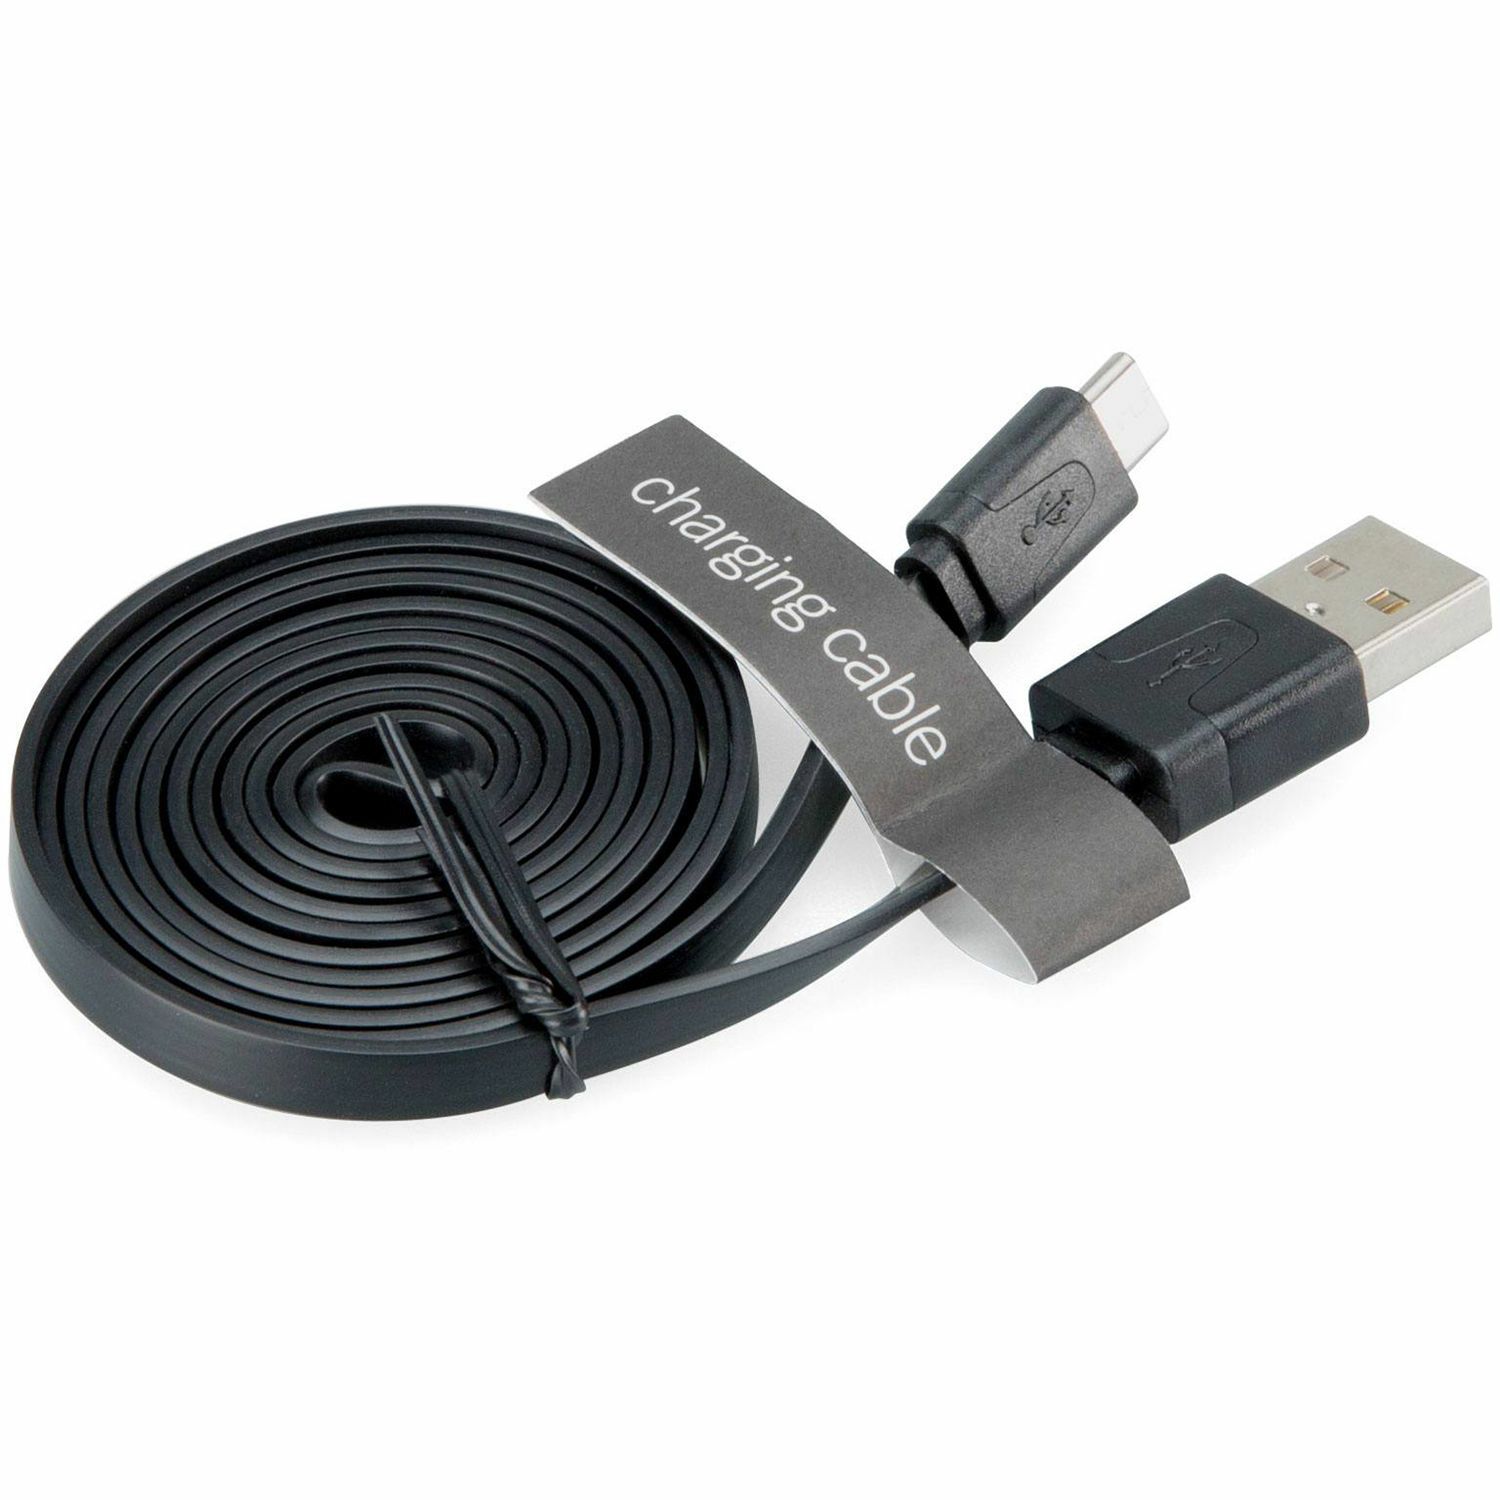 Polaroid Originals Impossible Project Hardware I-1 charger cable (004587)